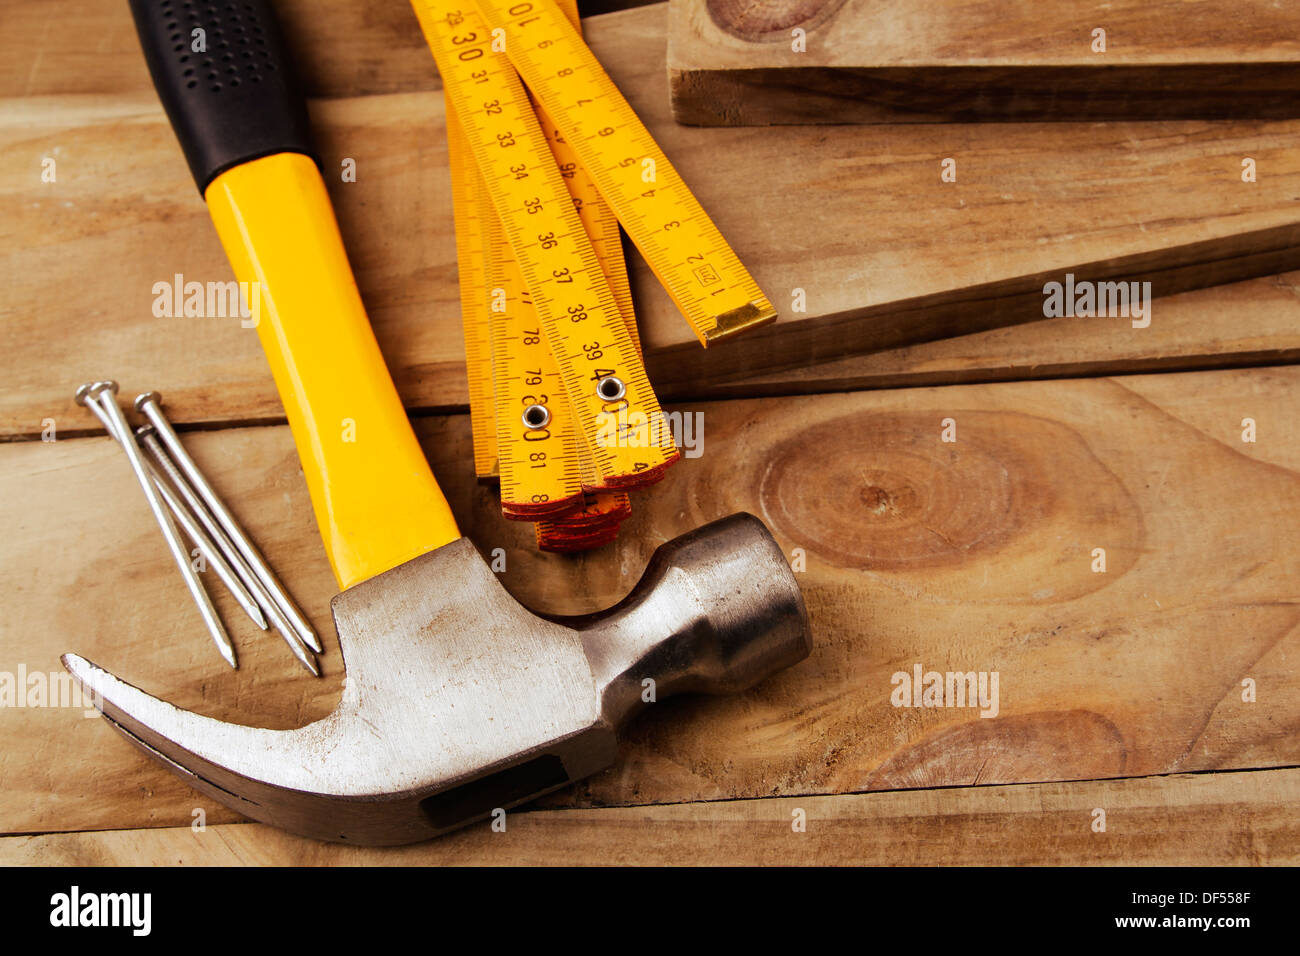 Nails, hammer and folding ruler on wood Stock Photo